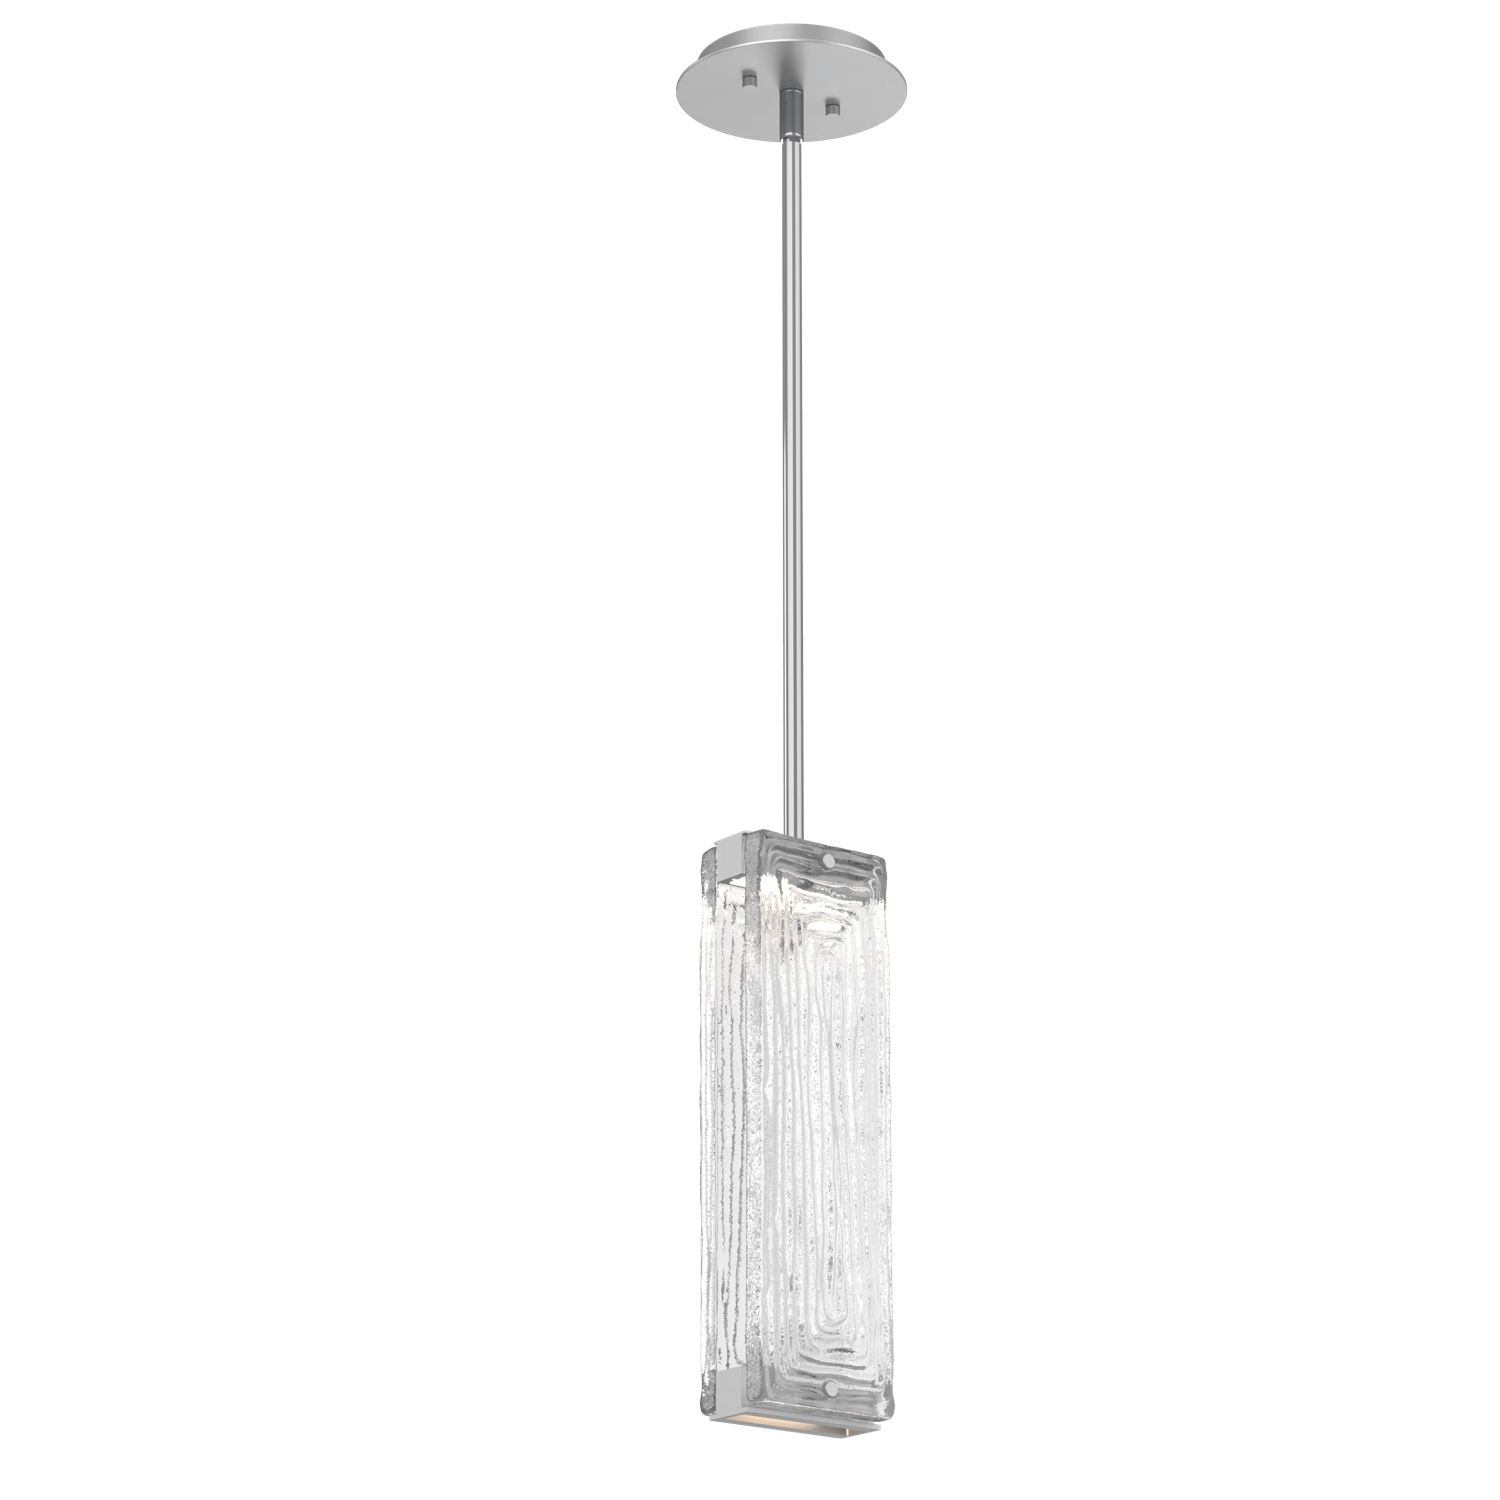 LAB0090-01-CS-TL-Hammerton-Studio-Tabulo-pendant-light-with-classic-silver-finish-and-clear-linea-cast-glass-shade-and-LED-lamping